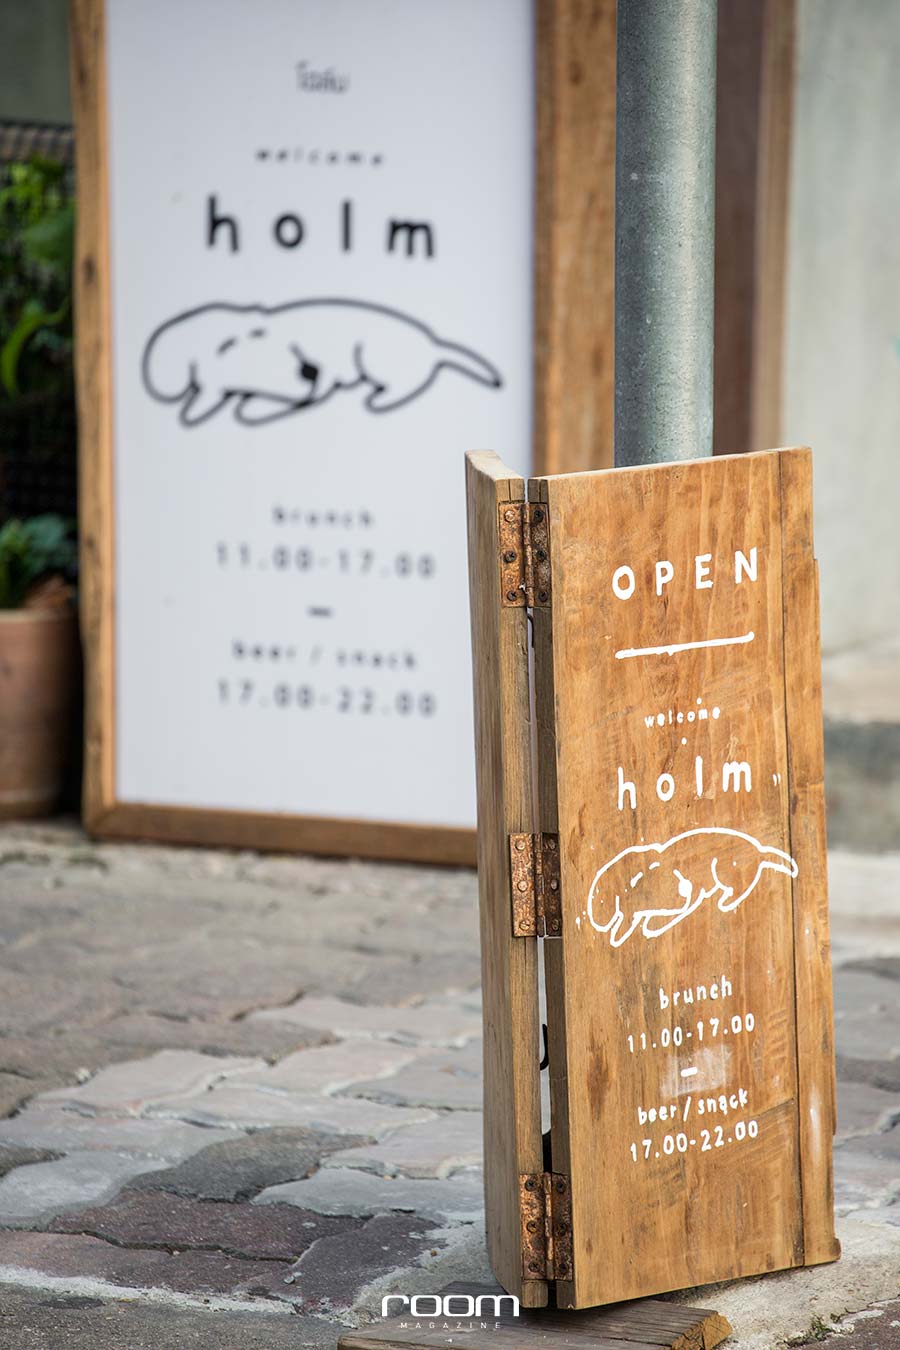 HOLM HUMBLE CAFE